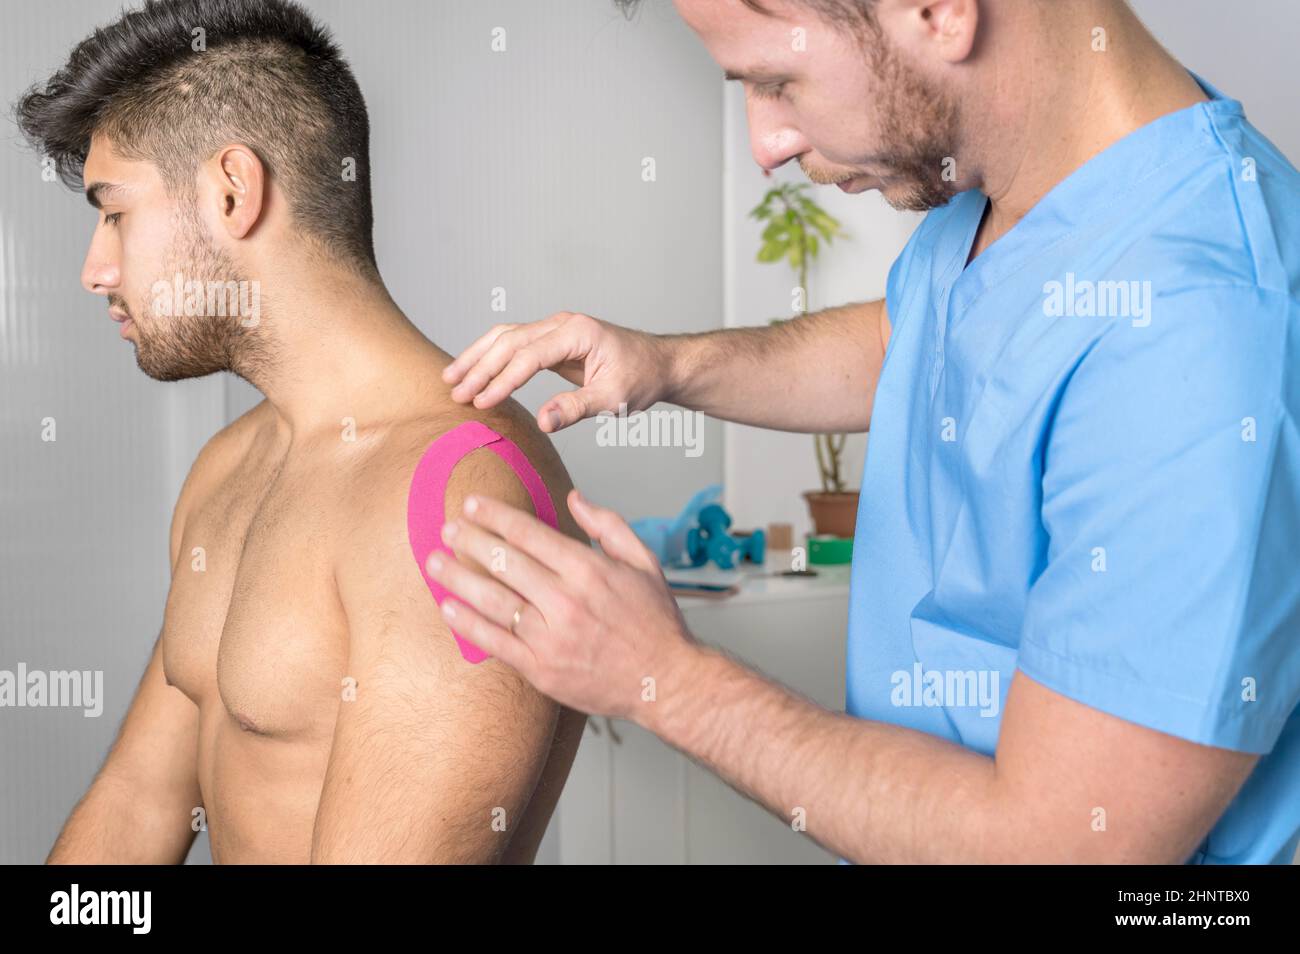 Physical therapist applying kinesio tape on male patient shoulder. Kinesiology, physical therapy, rehabilitation concept. close up Stock Photo